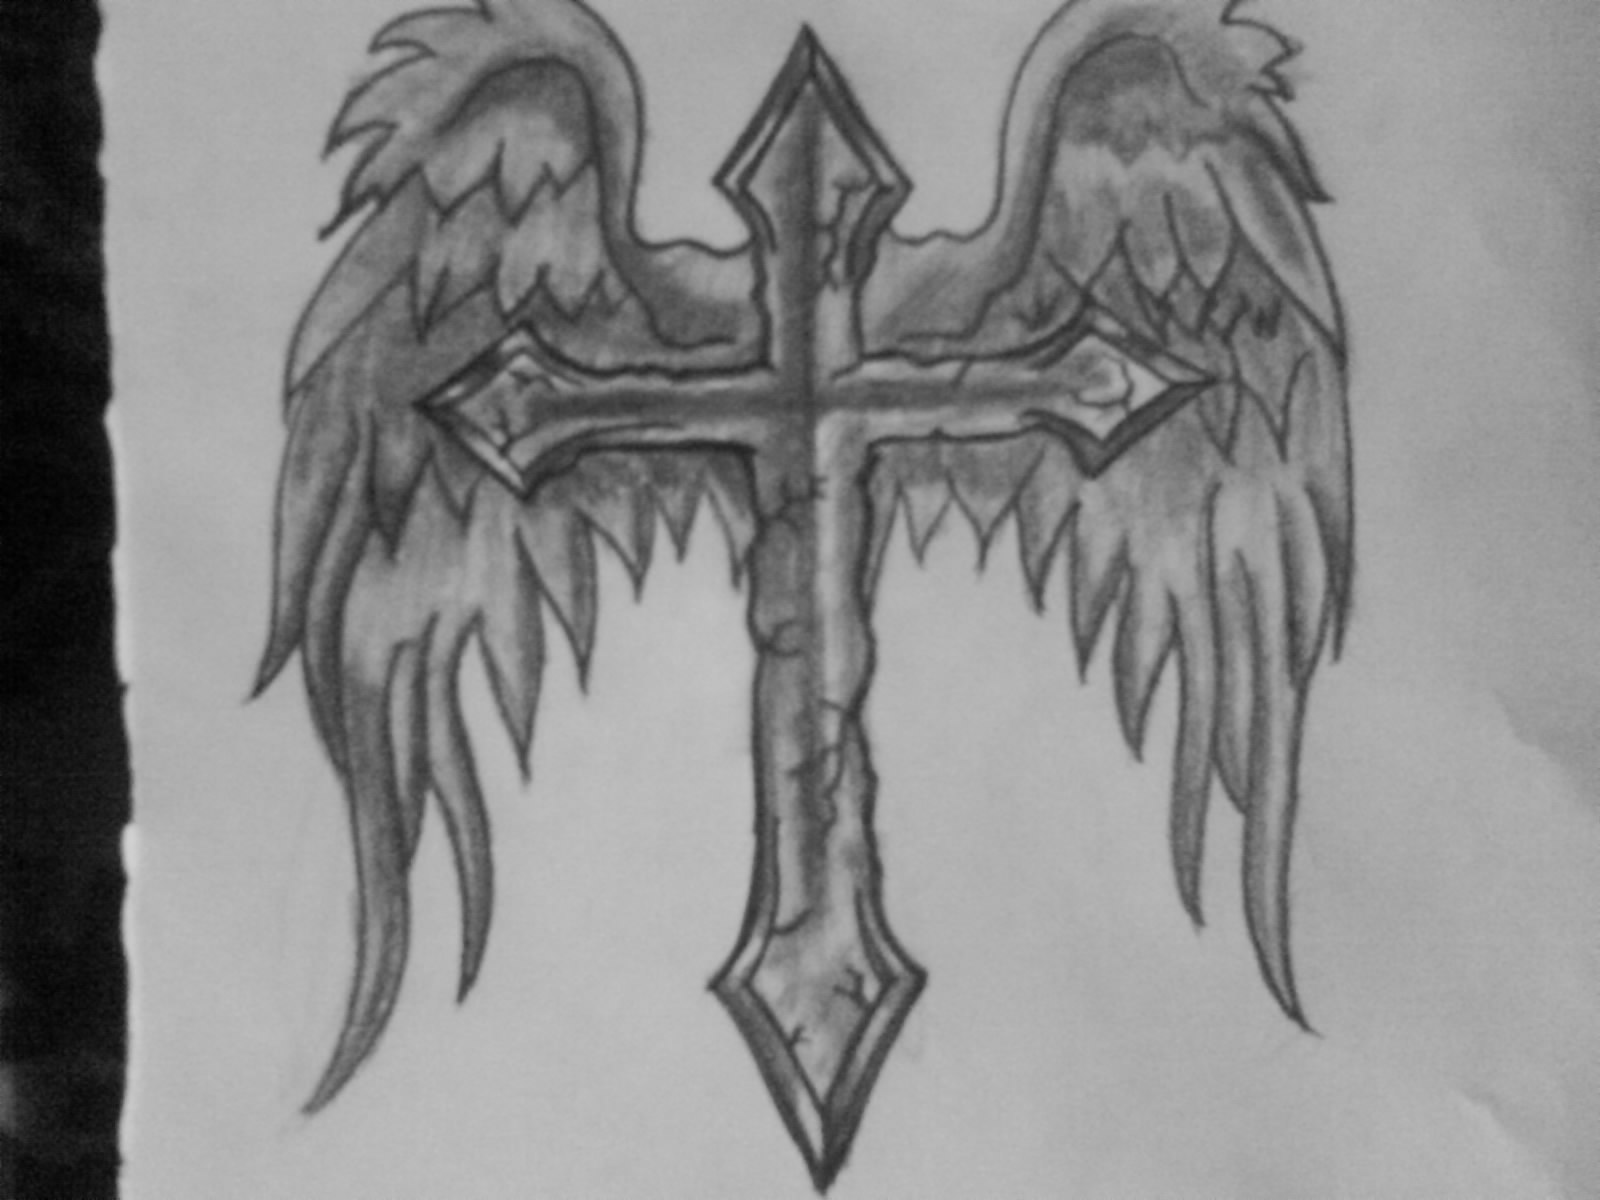 Cross With Angel Wings Tattoo Designs. Before you decide on getting angel